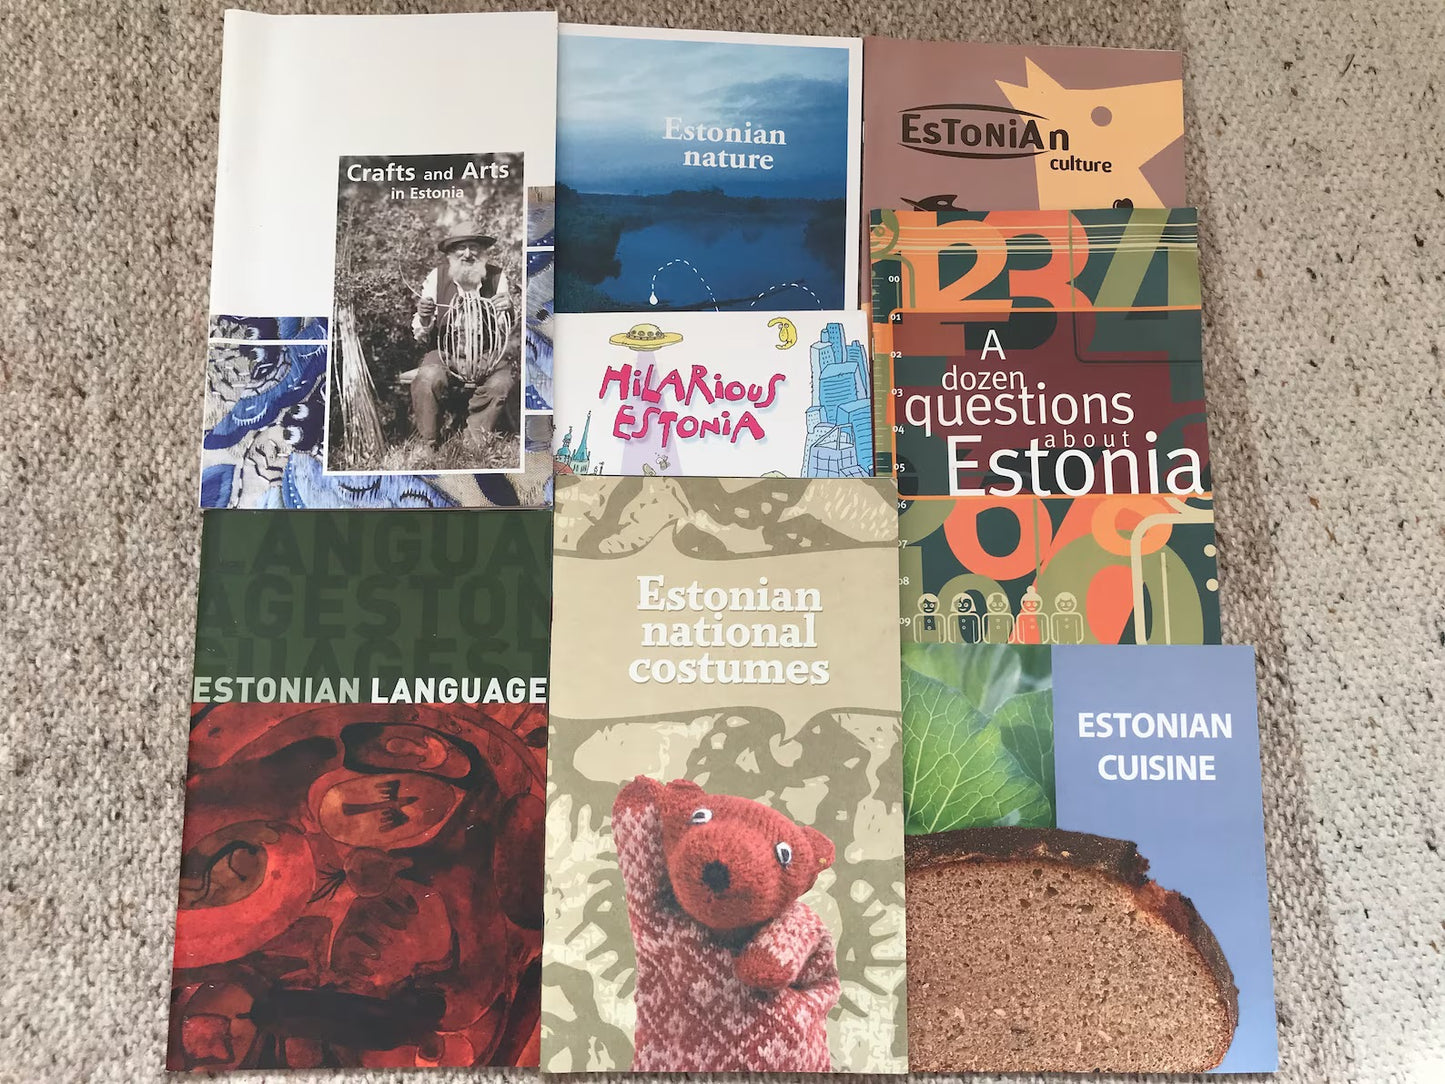 Amazing 8 books about Estonia and Estonians - A lot of facts and photos plus more information - All books are in English language.